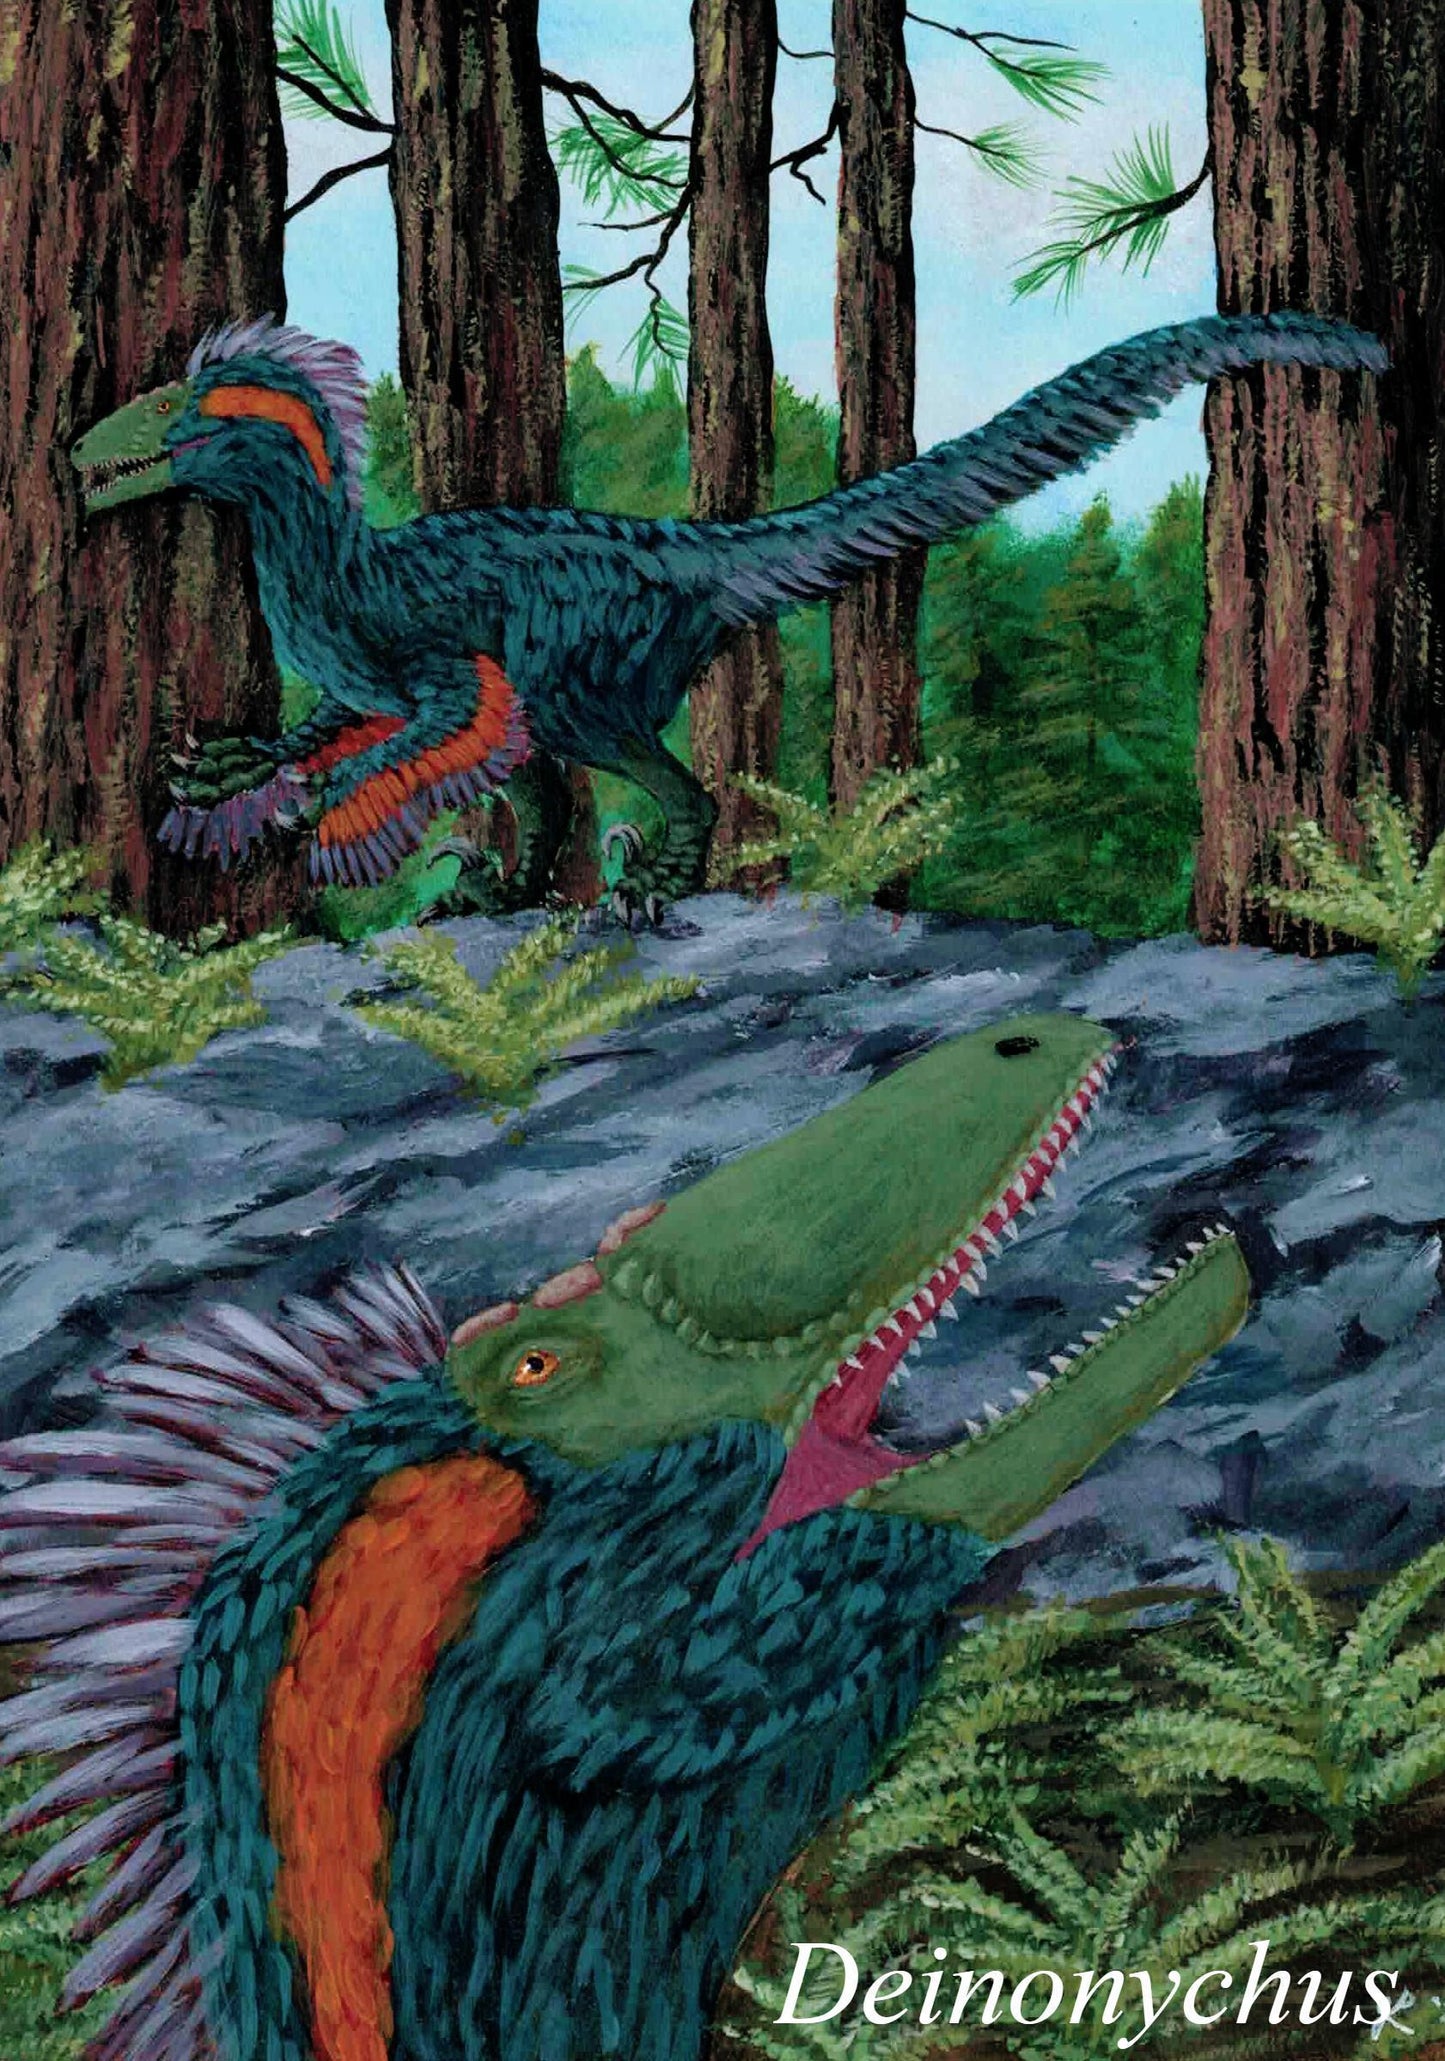 Exclusive Deinonychus paleoart in green feathers in a forest that comes with the Deinonychus killing claw cast